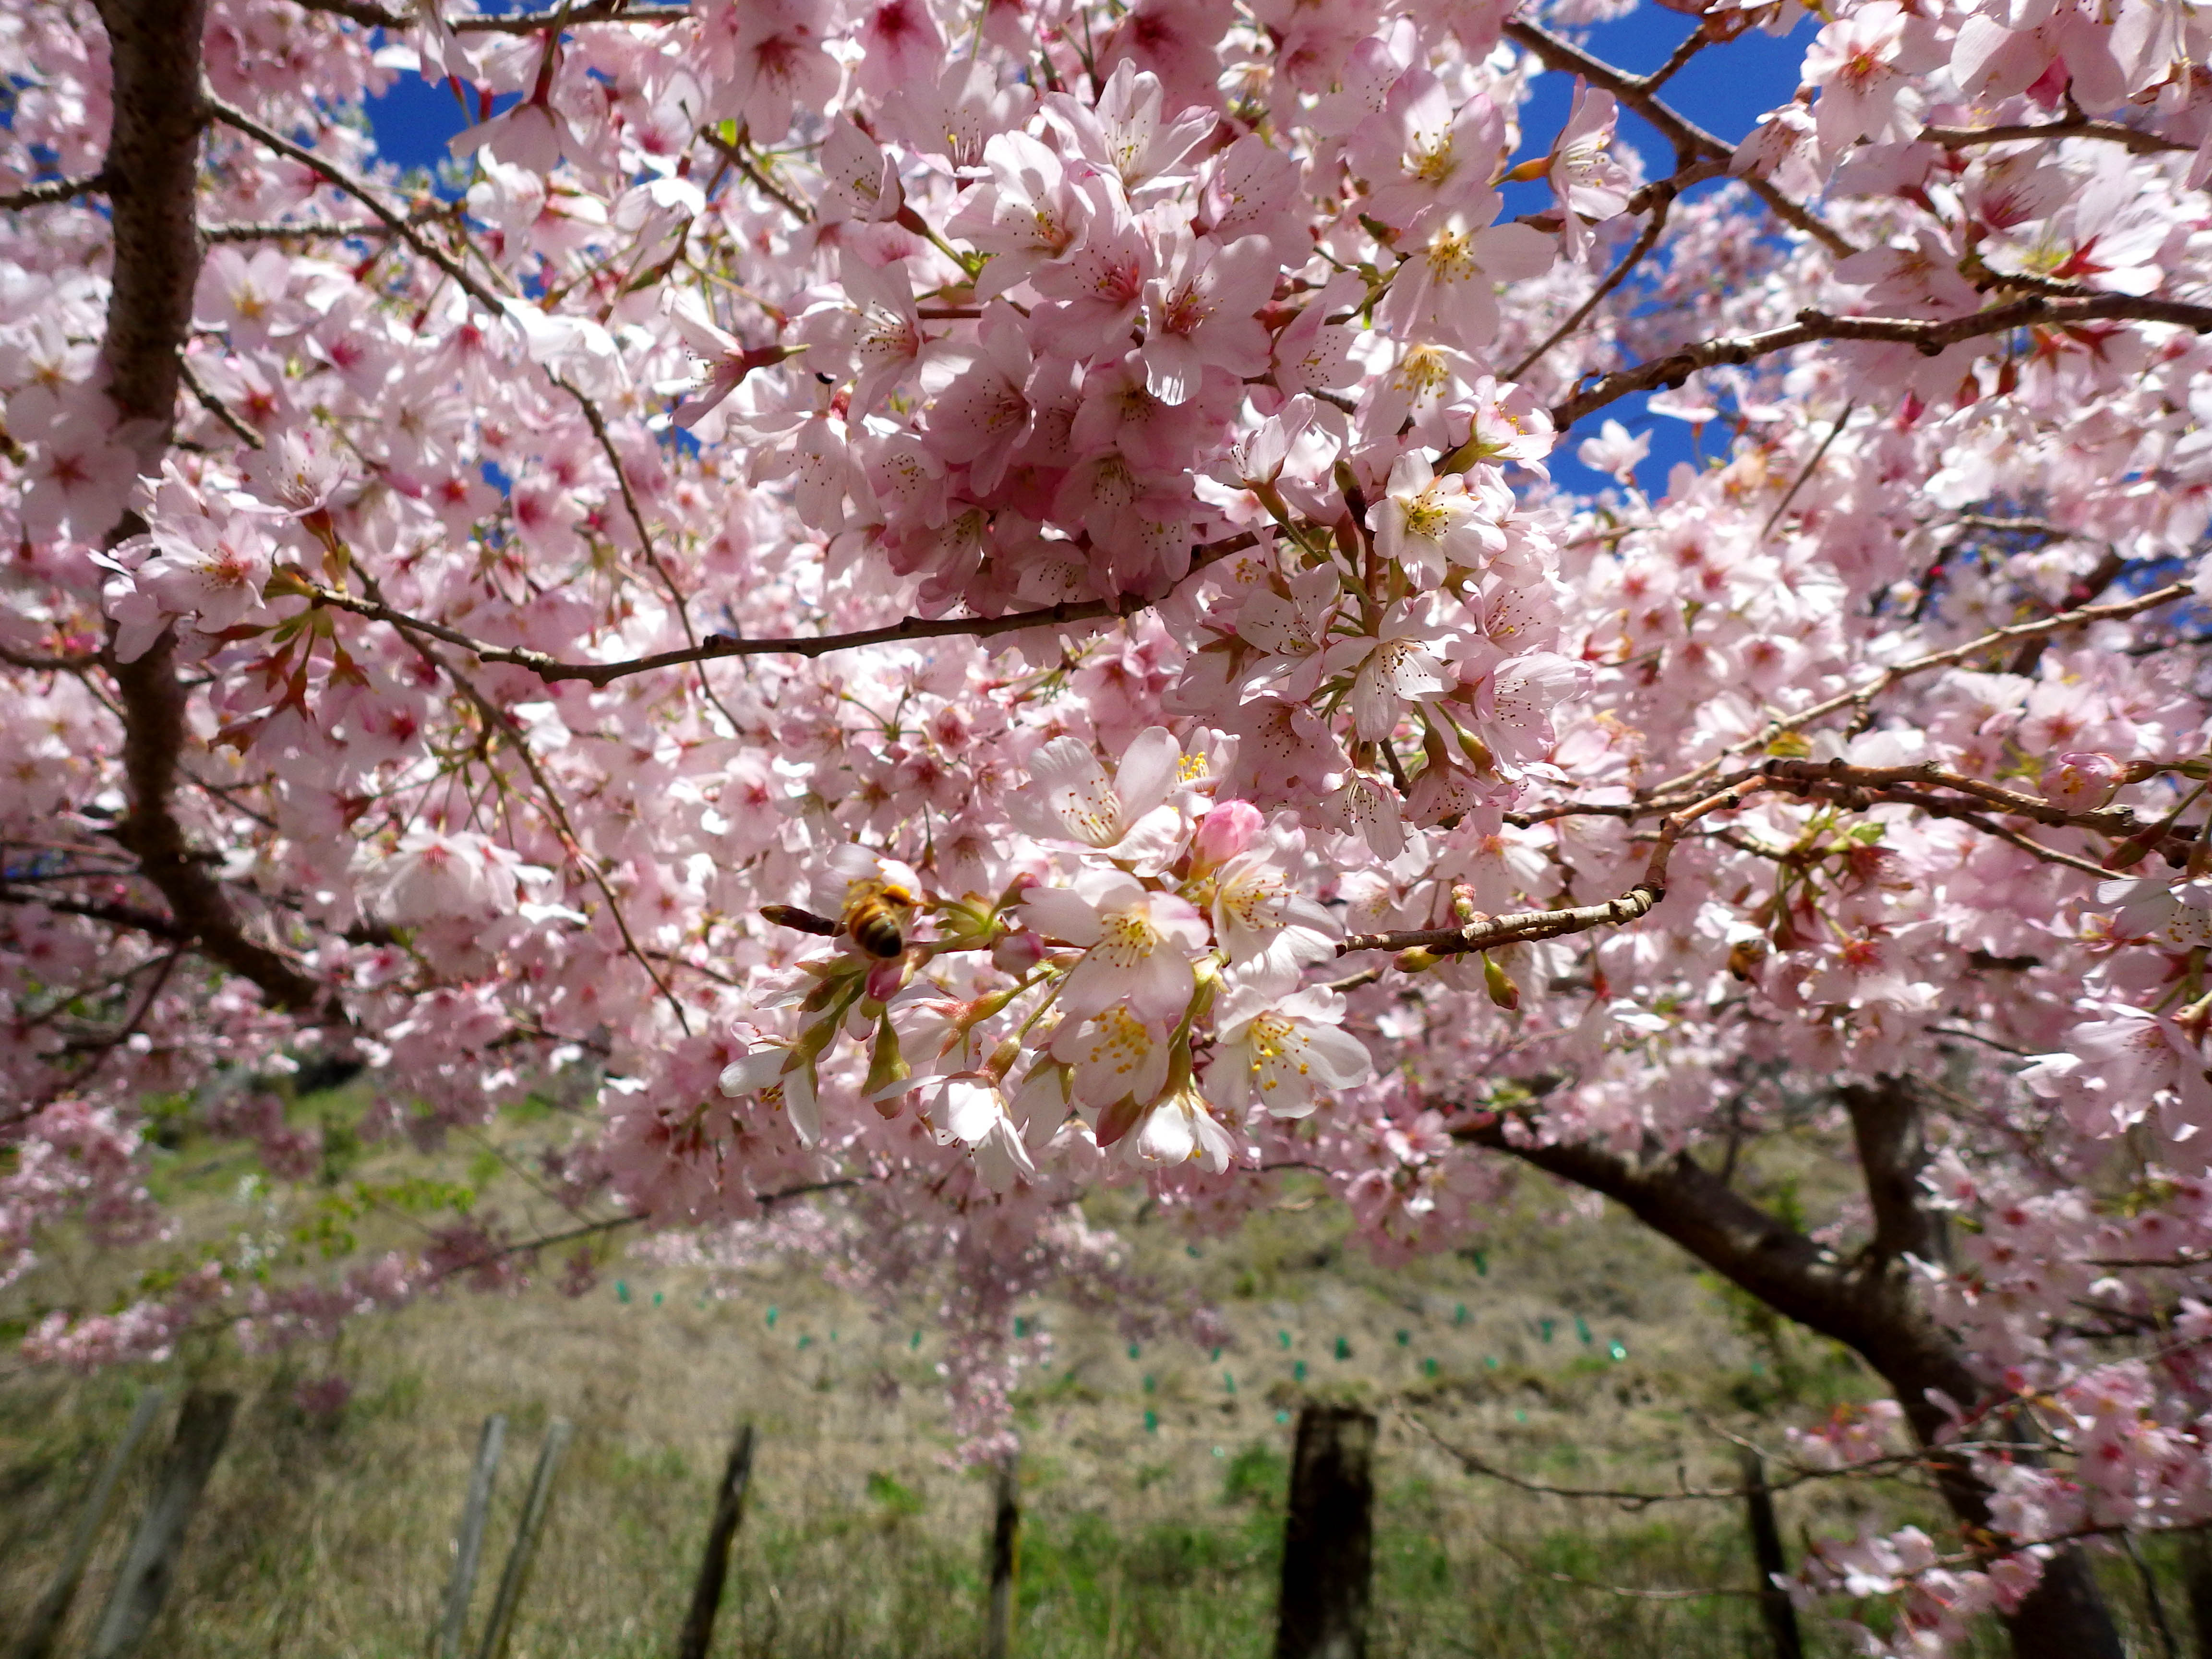 A breath of Cherry Blossom filled air as you head away from the coast line.